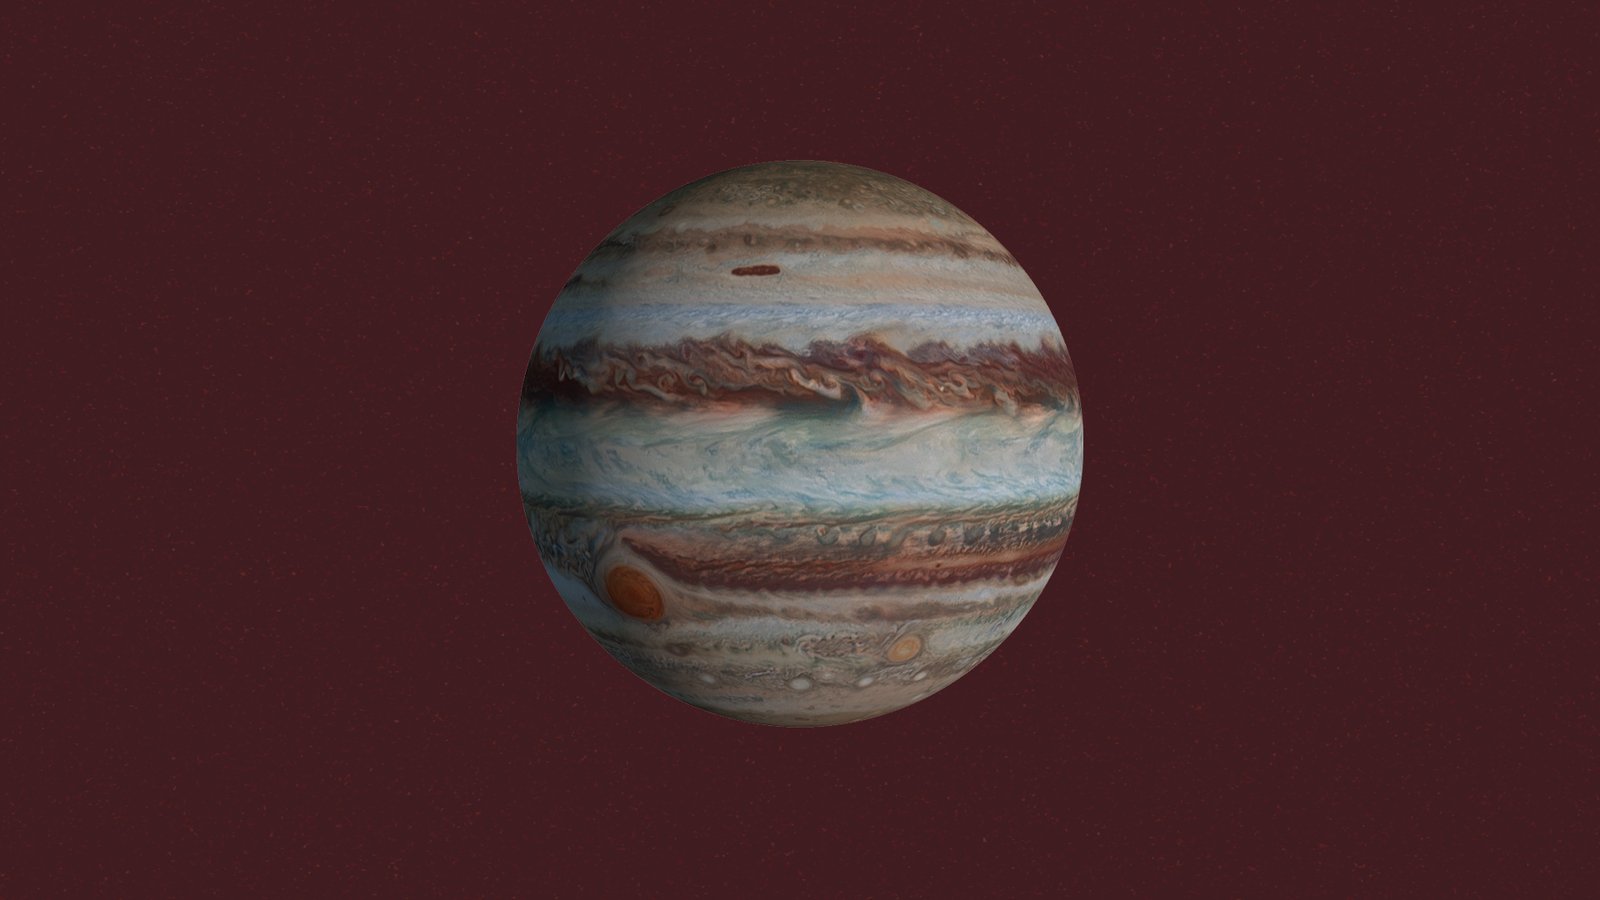 Jupiter is the largest planet in our Solar System.